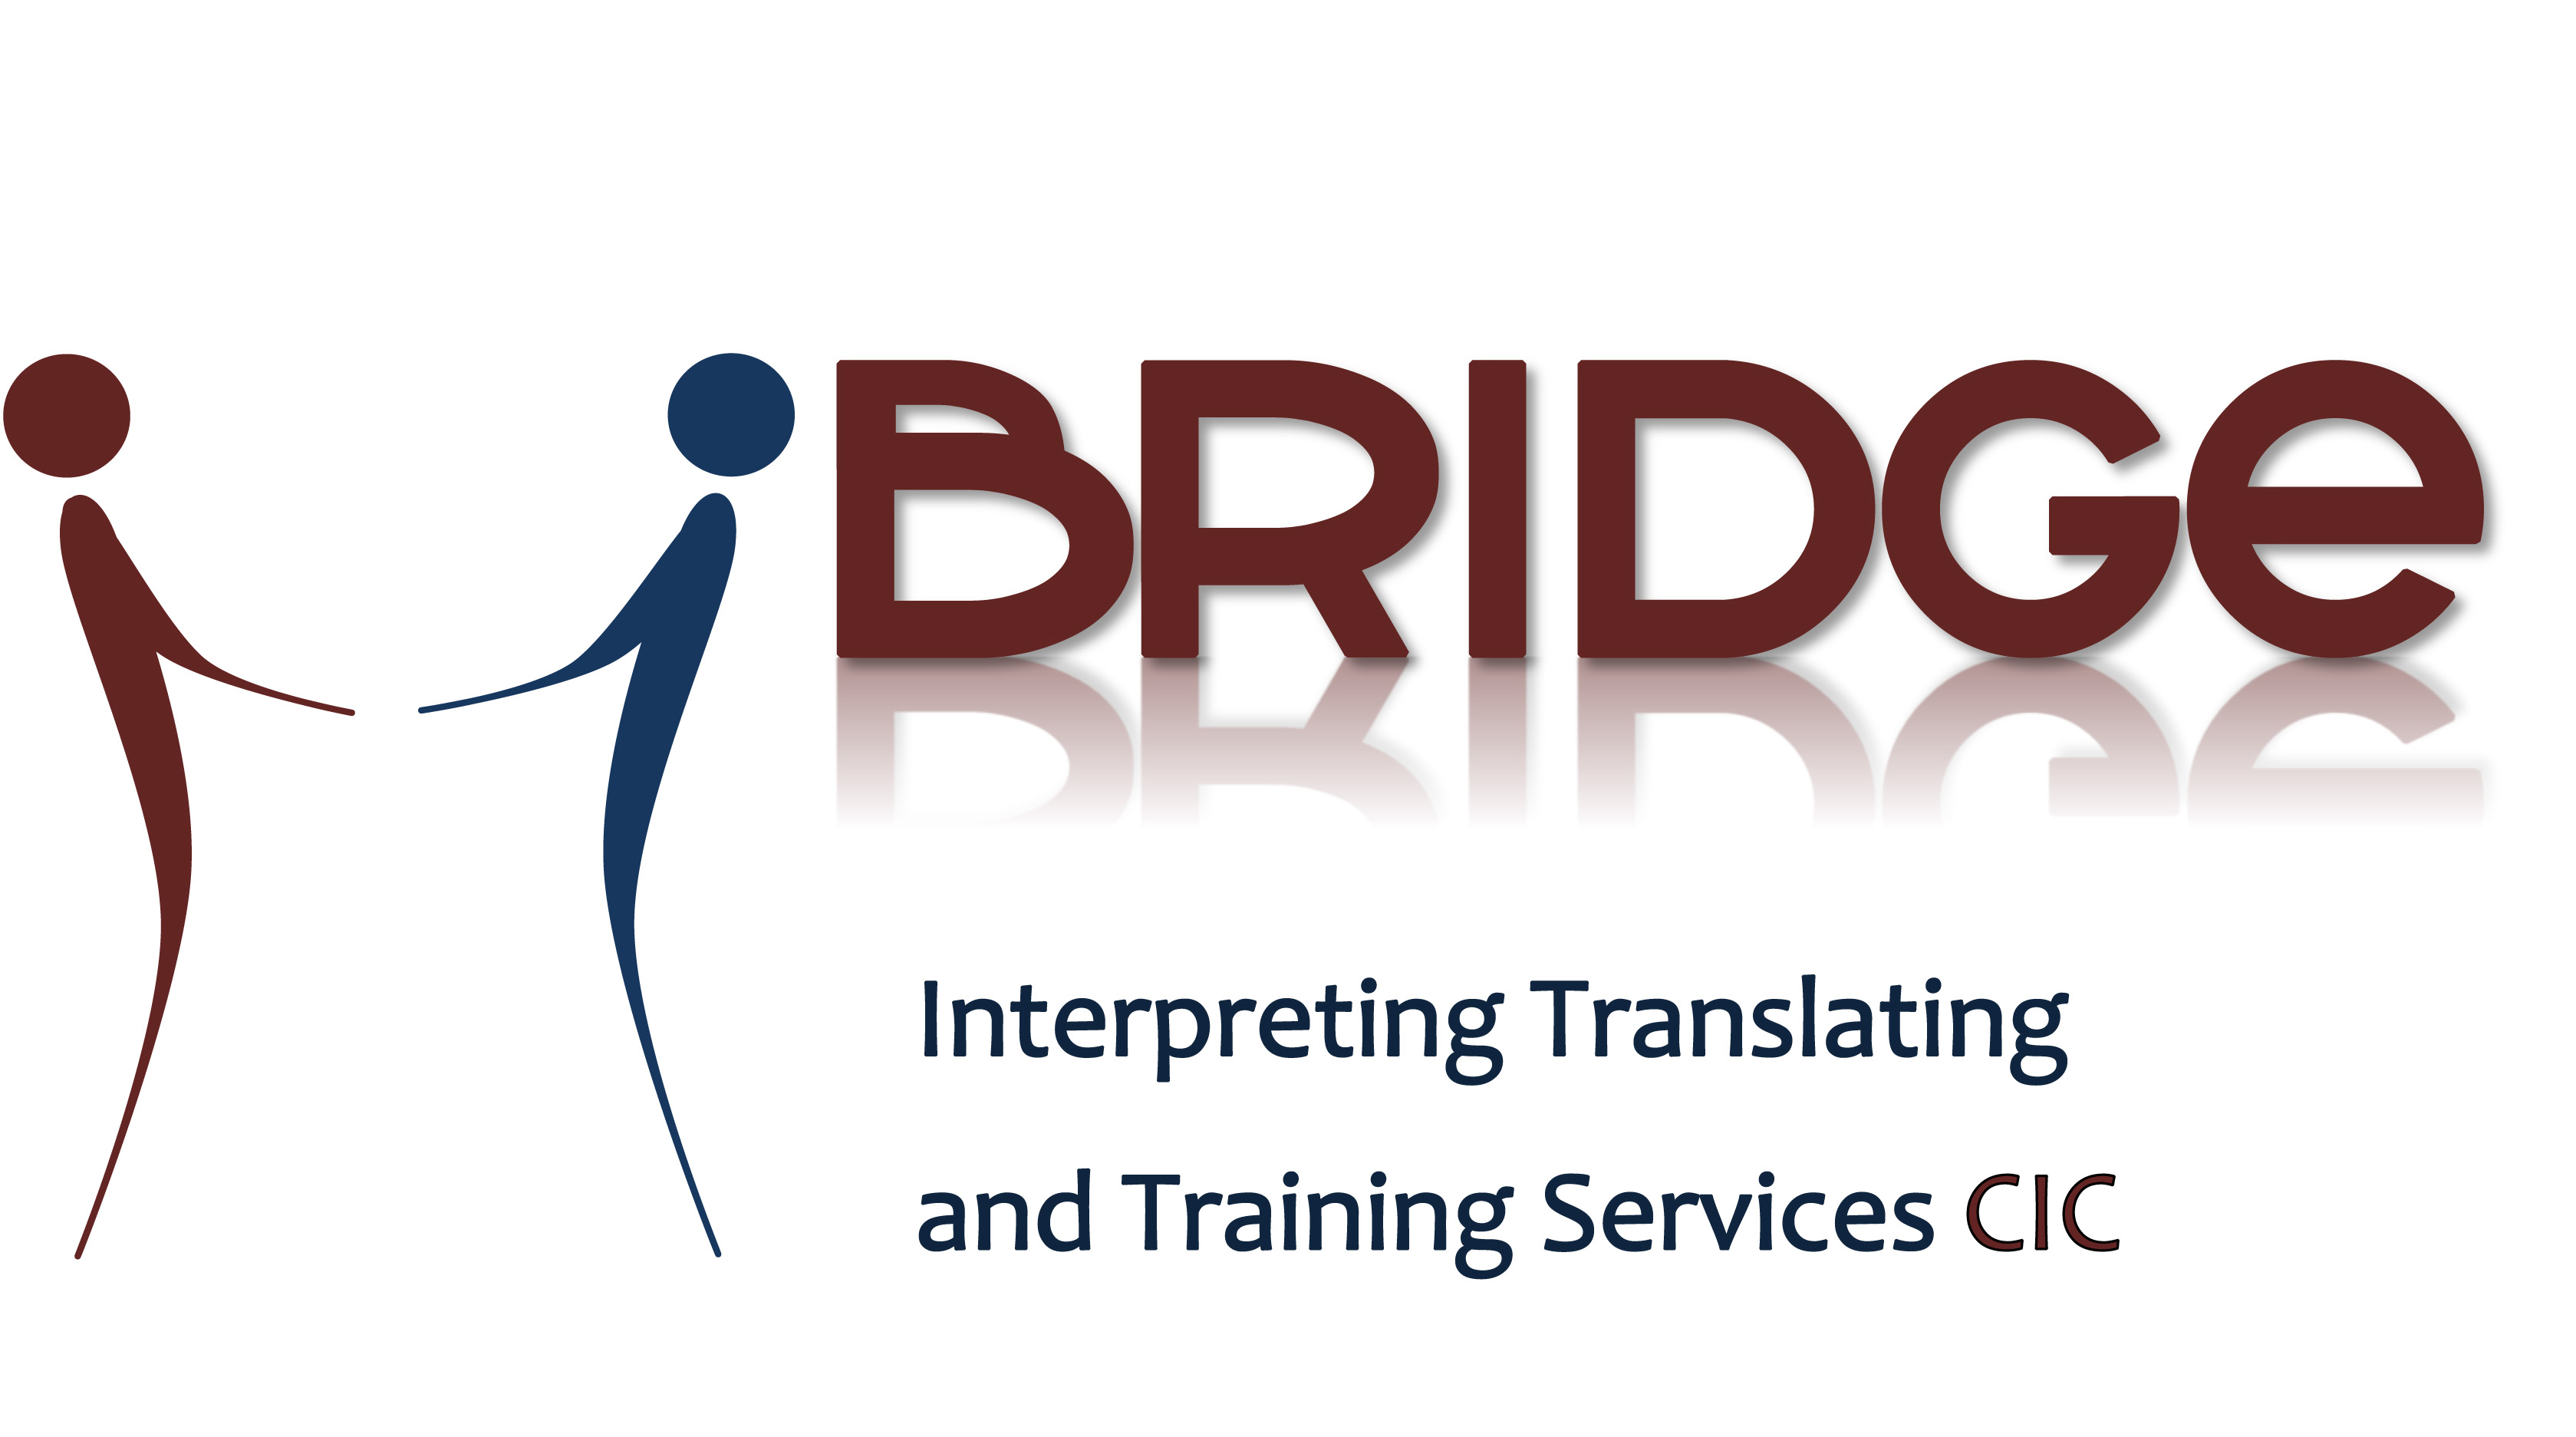 More about Bridge Interpreting Translating and Training Services